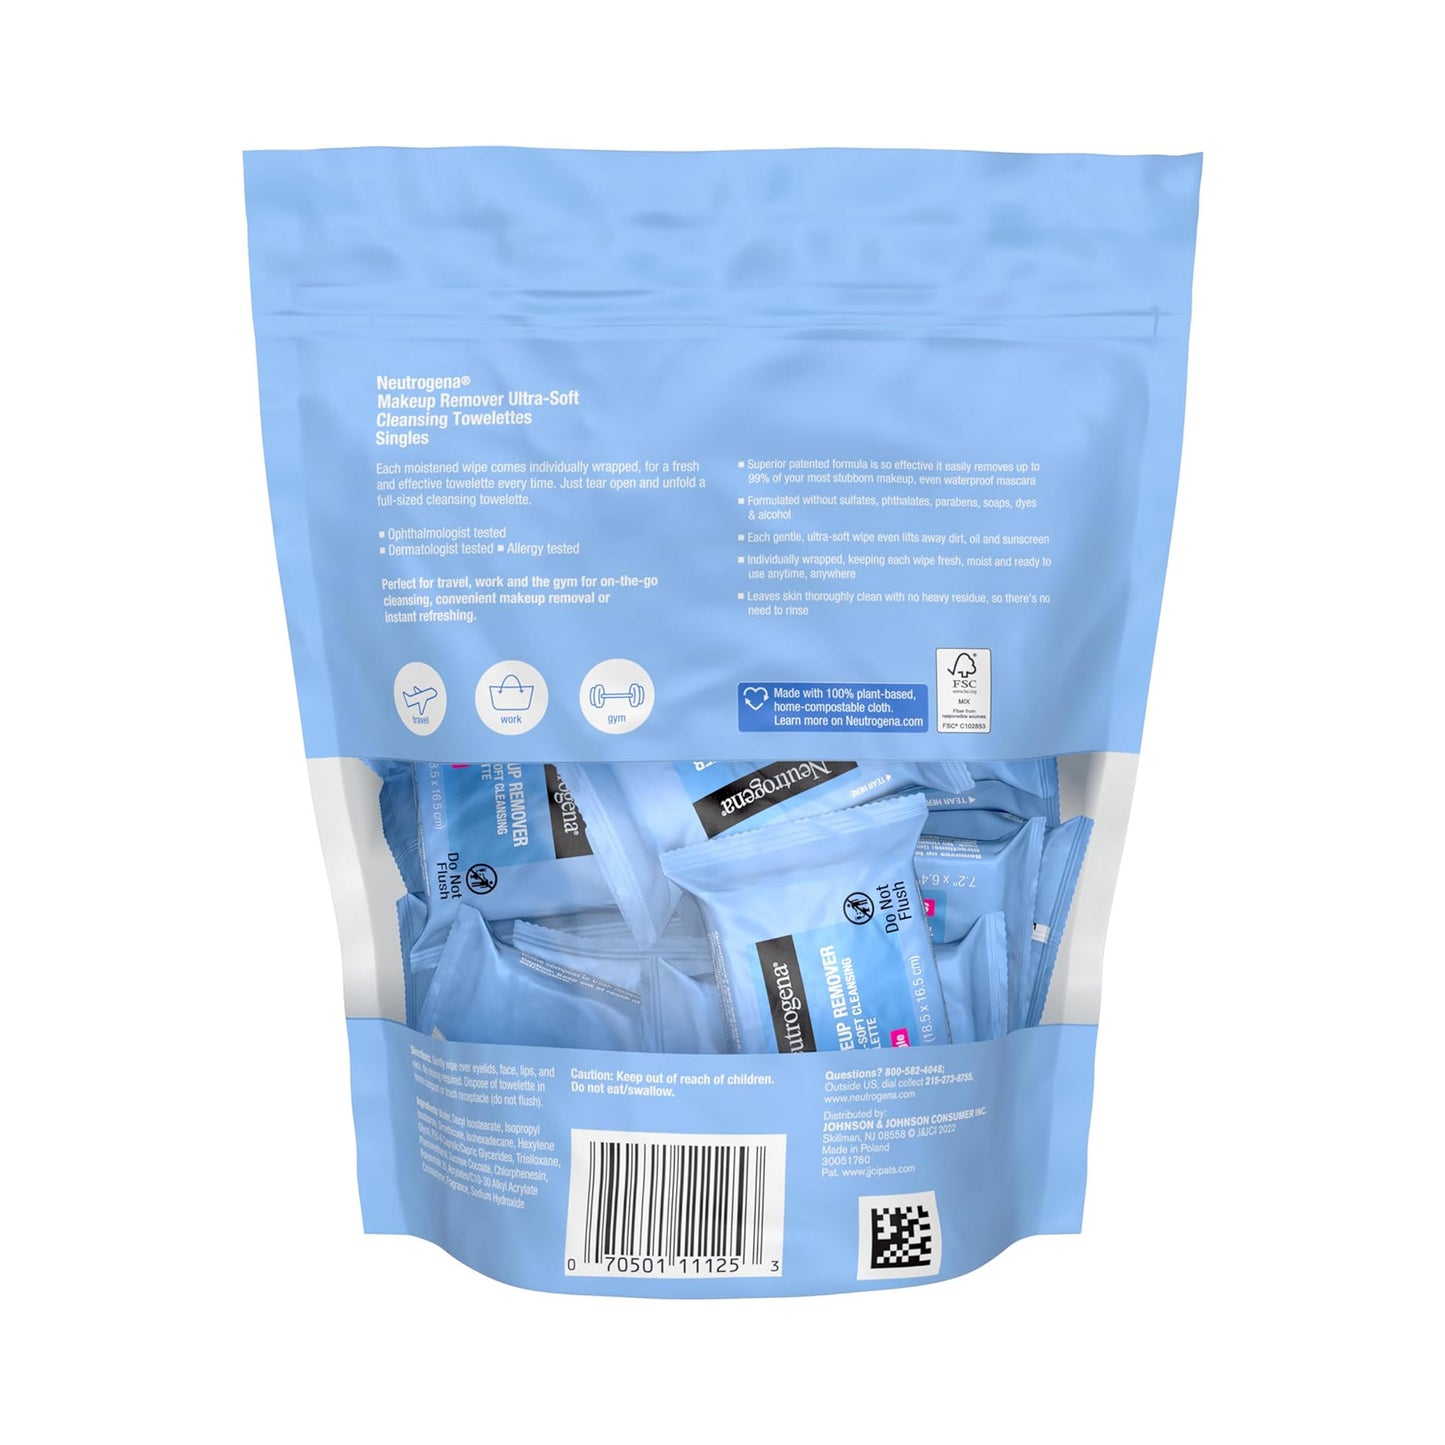 Neutrogena Makeup Remover Ultra-Soft Cleansing Towelettes 20 Ct